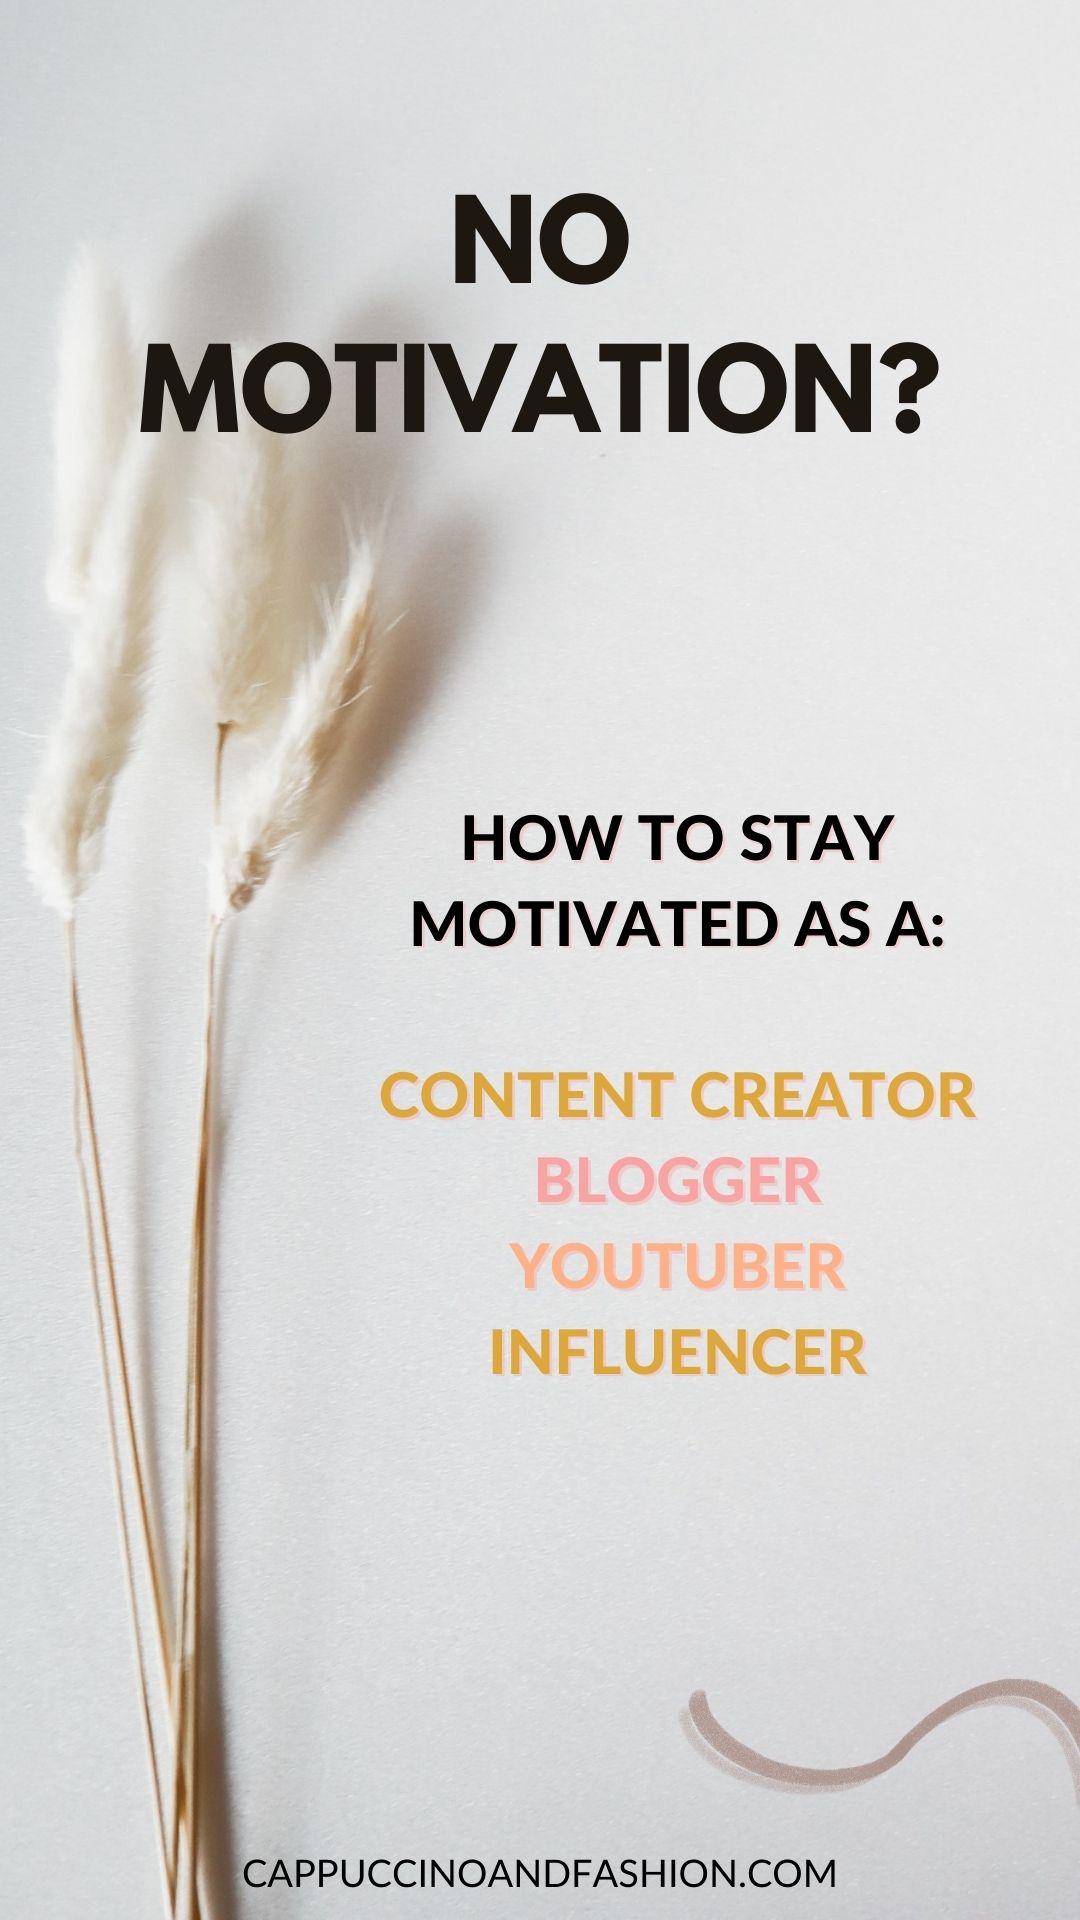 No motivation? How to stay motivated as a content creator, blogger, YouTuber, influencer, entrepreneur